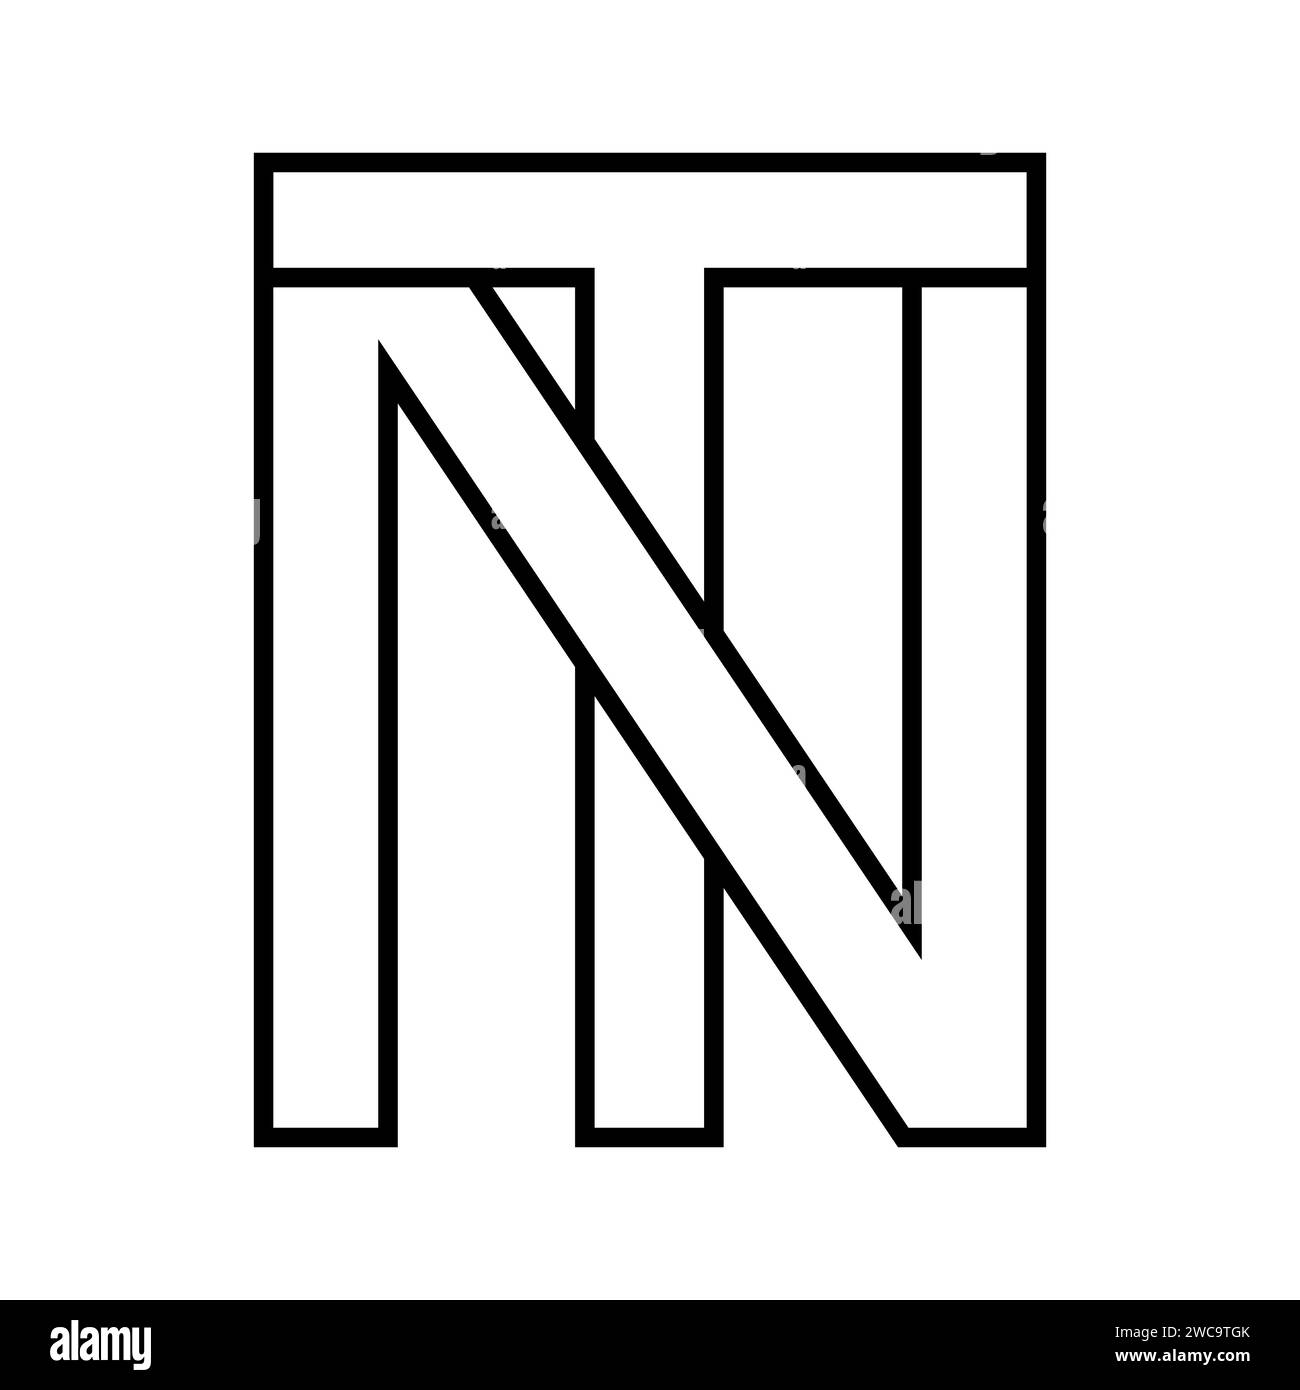 Logo sign nt tn icon double letters logotype n t Stock Vector